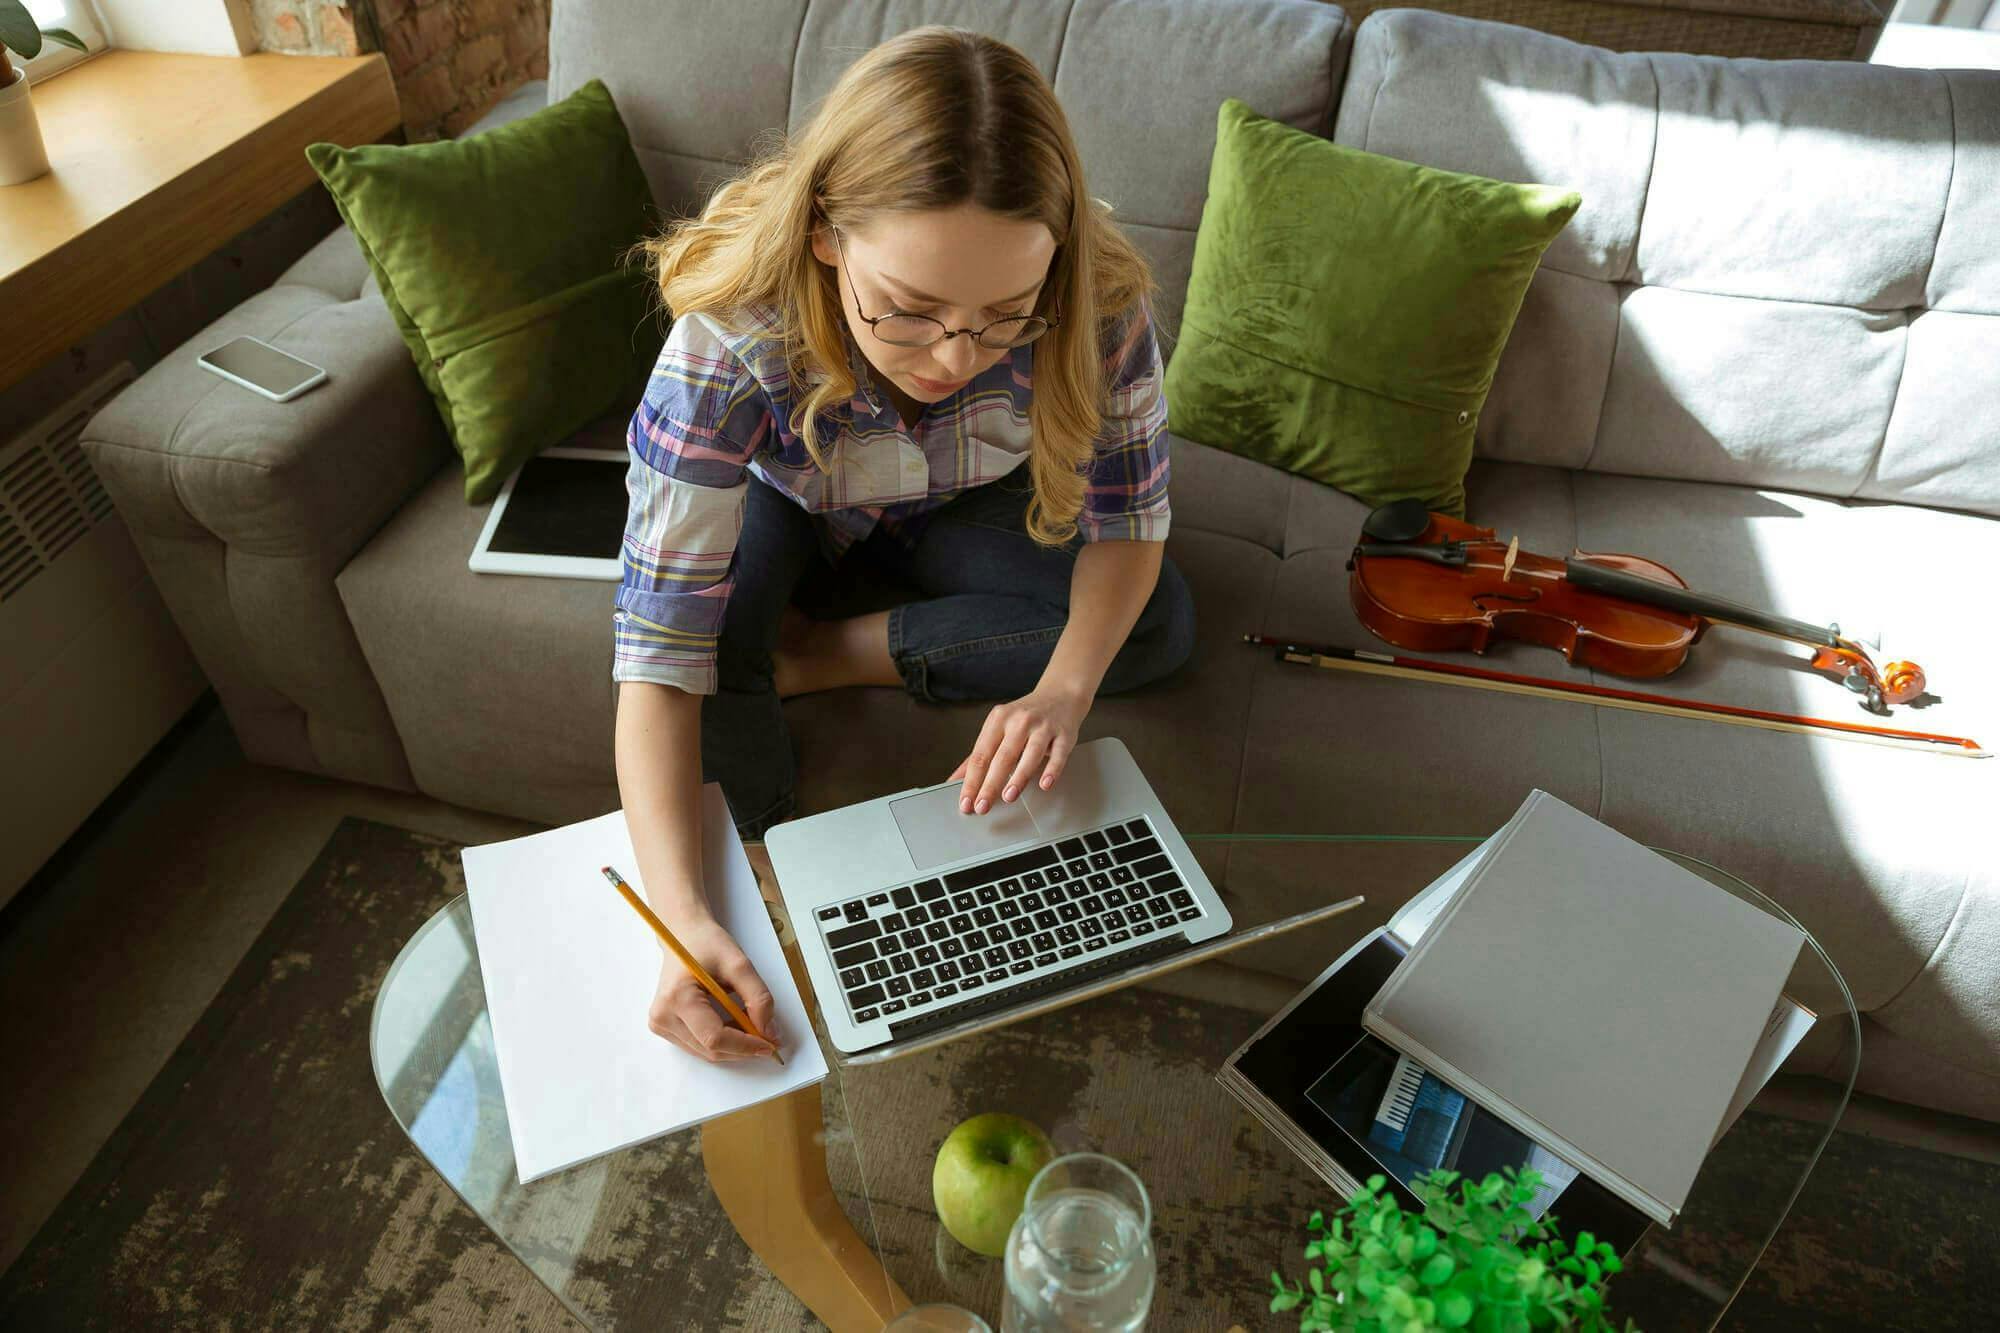 5 Working Tips For Productivity While Working From Home